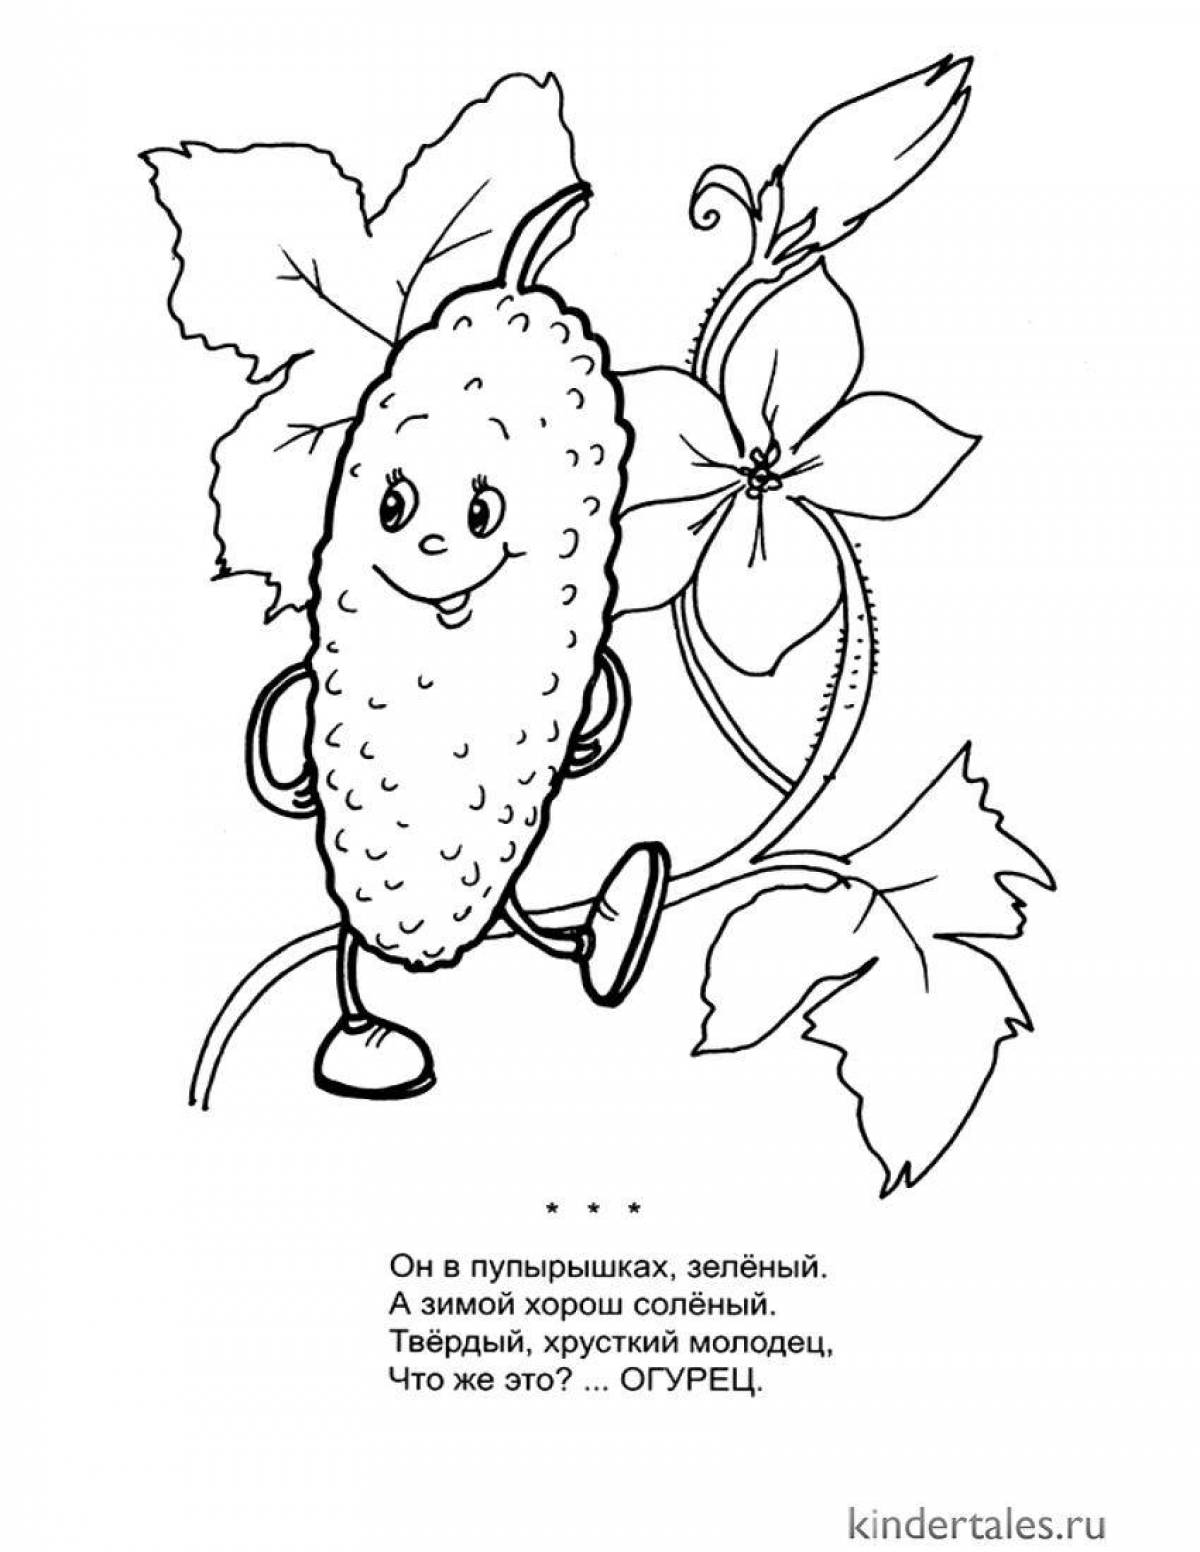 Fat cucumber coloring page